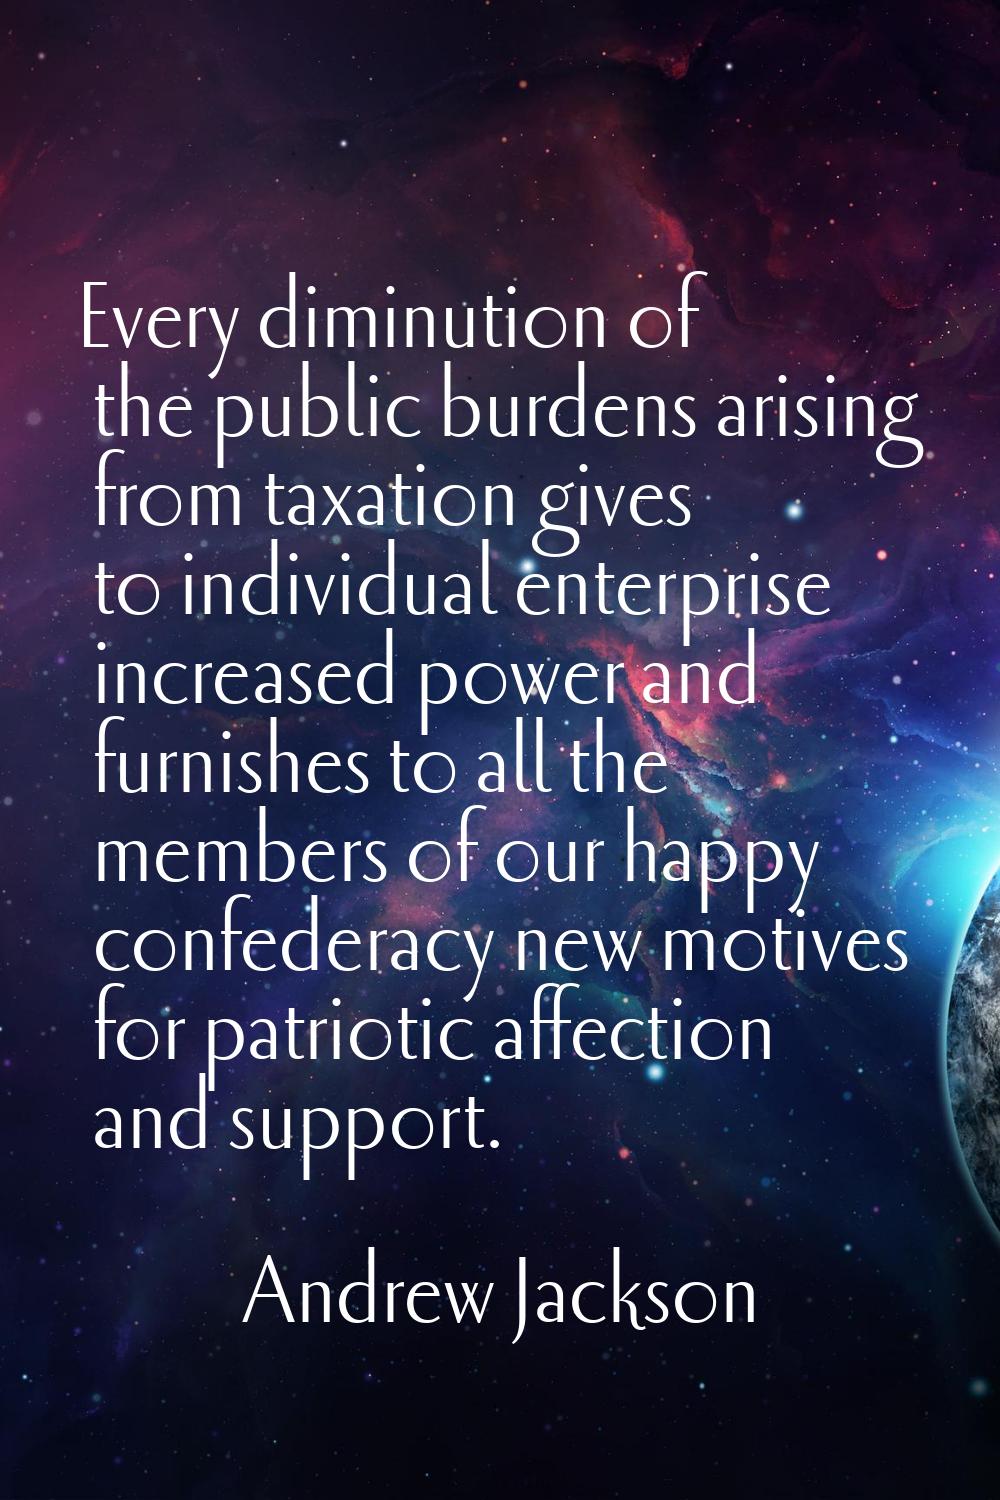 Every diminution of the public burdens arising from taxation gives to individual enterprise increas